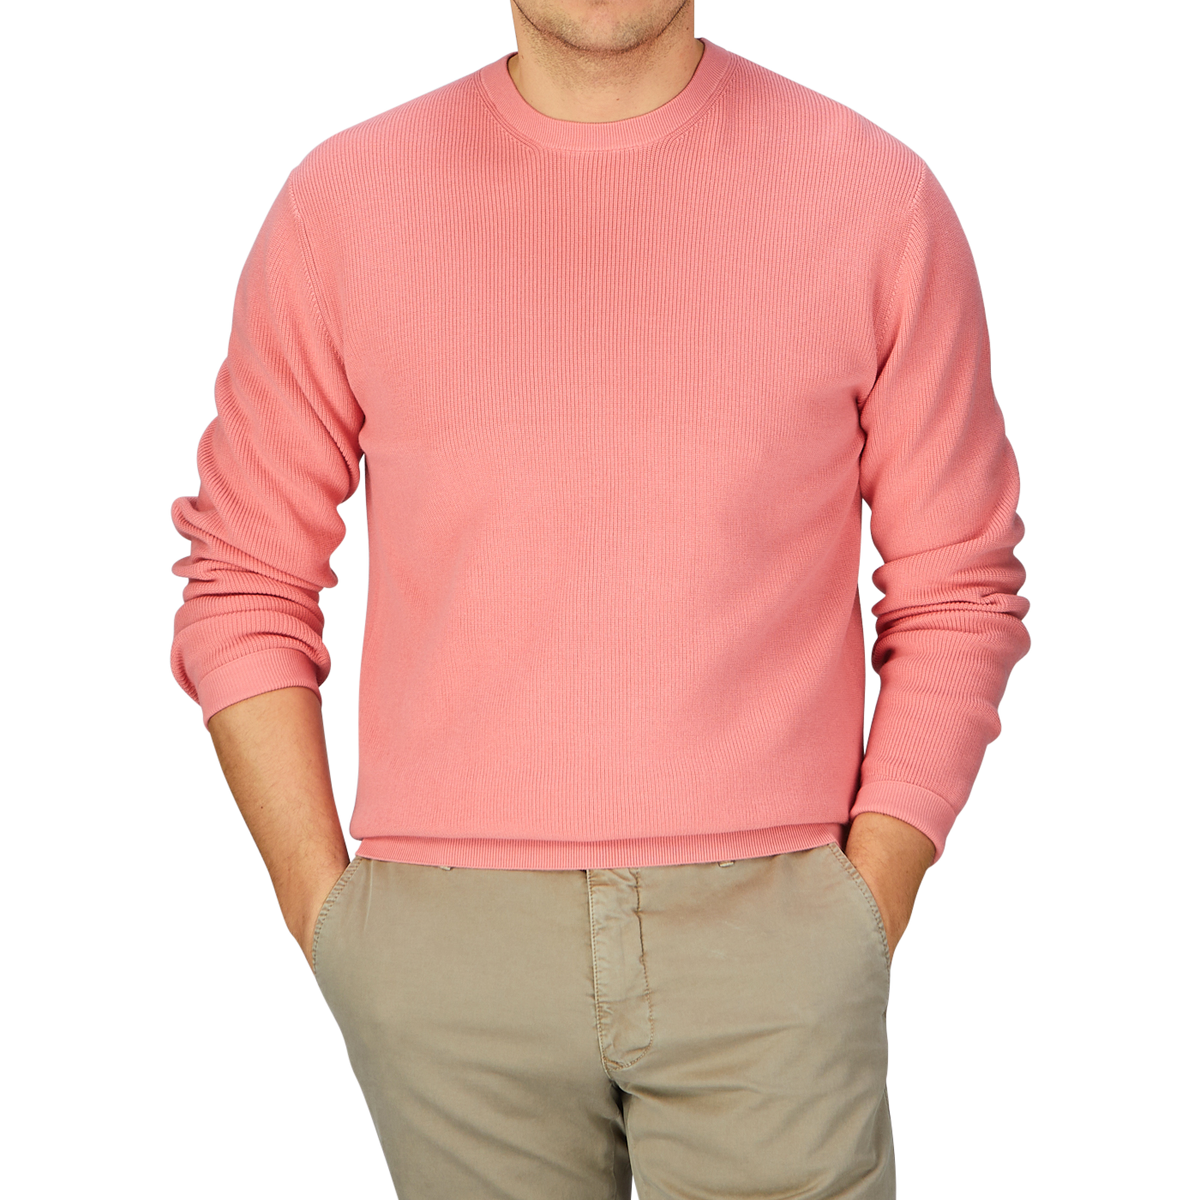 A man wearing a coral pink knitted cotton sweater from Aspesi and khaki pants.